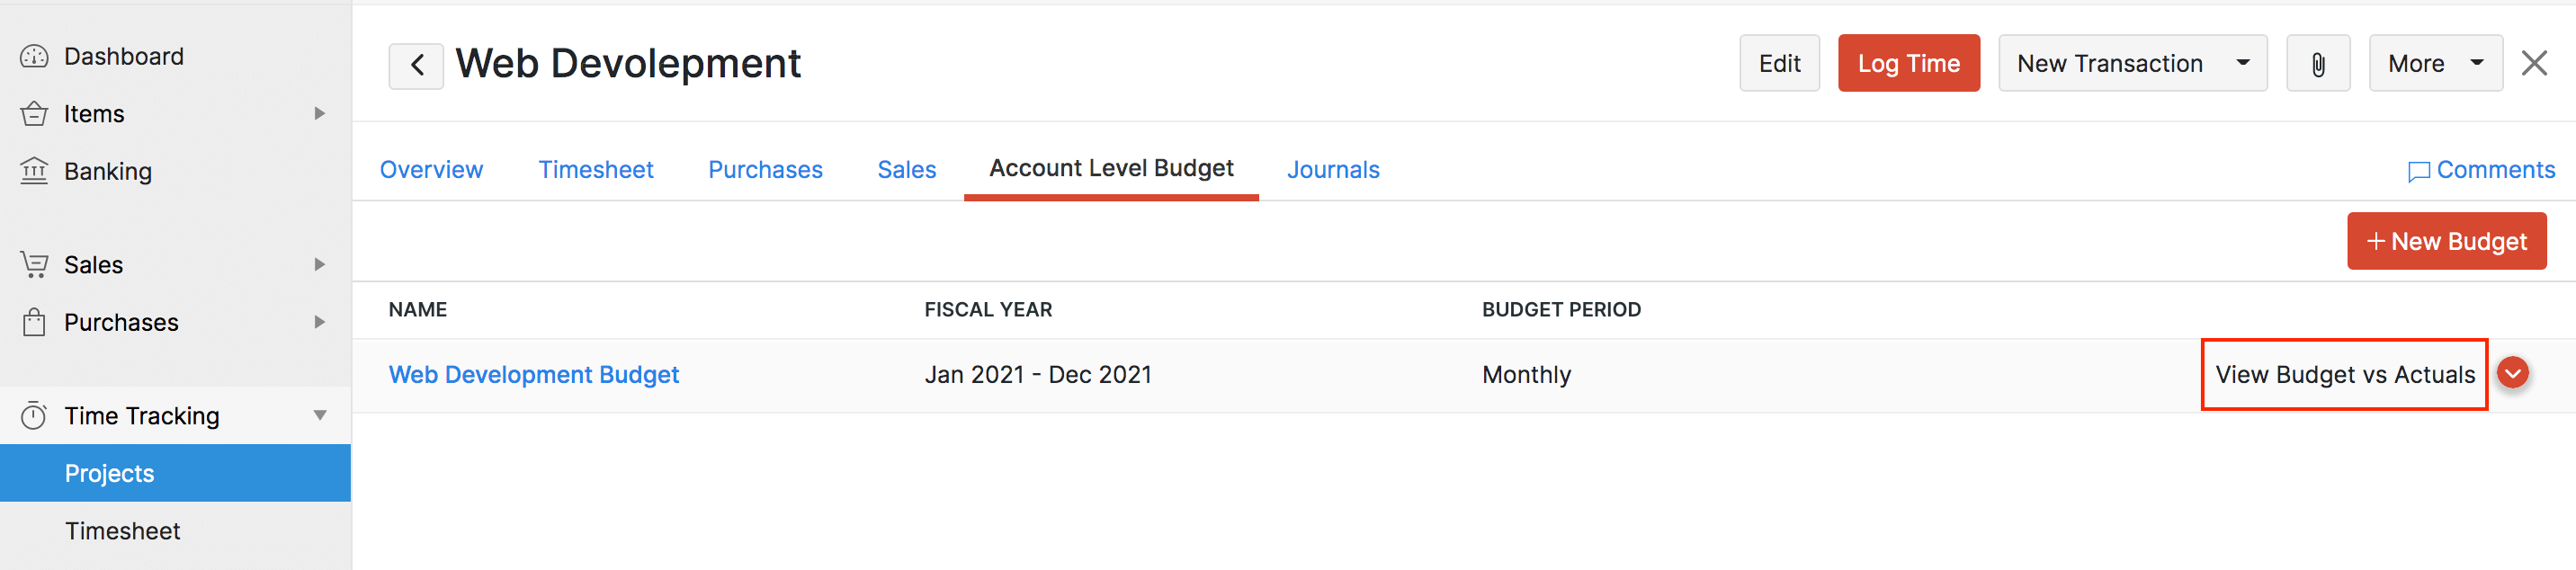 Project Overview Budget